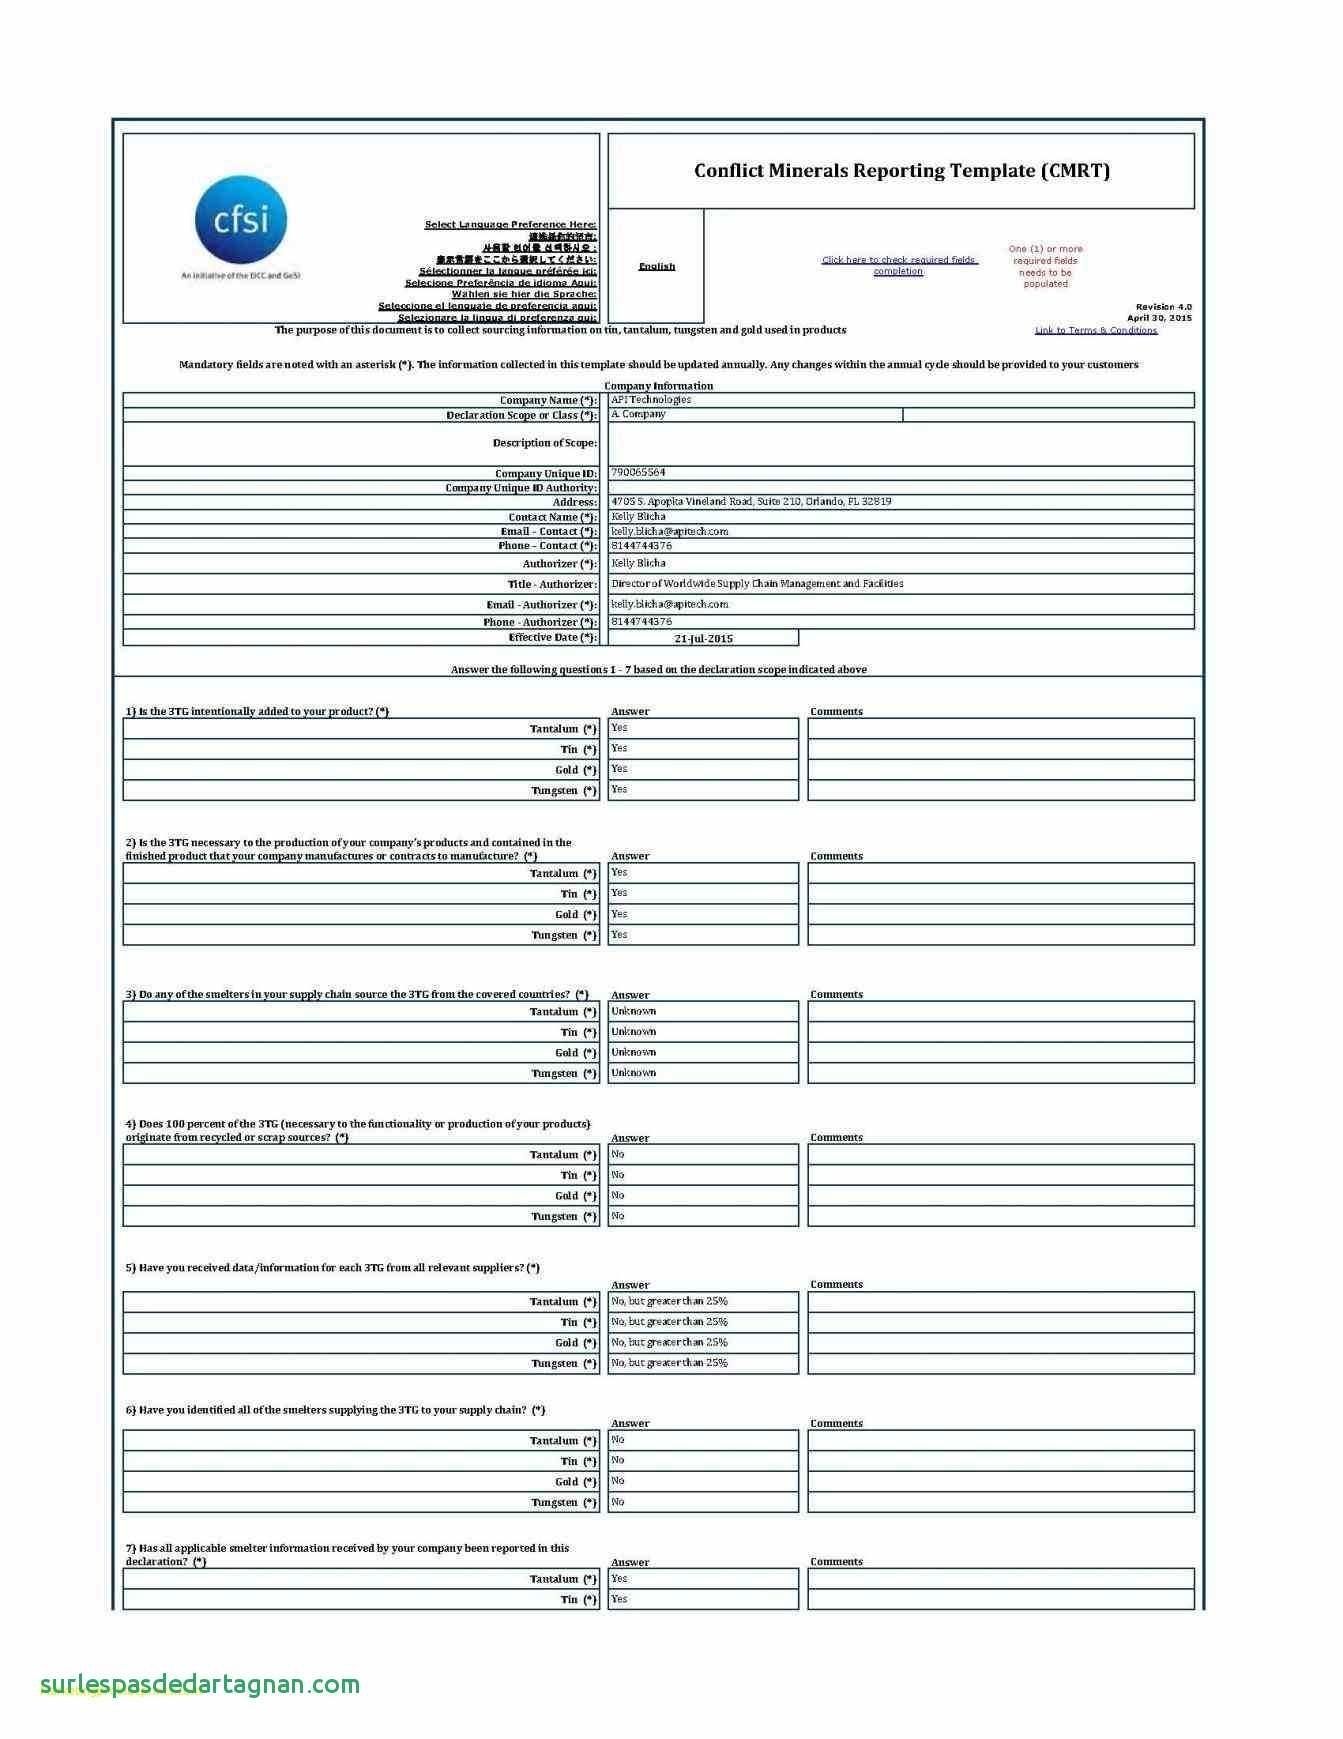 Ppvt 4 Sample Report Within Conflict Minerals Reporting Template